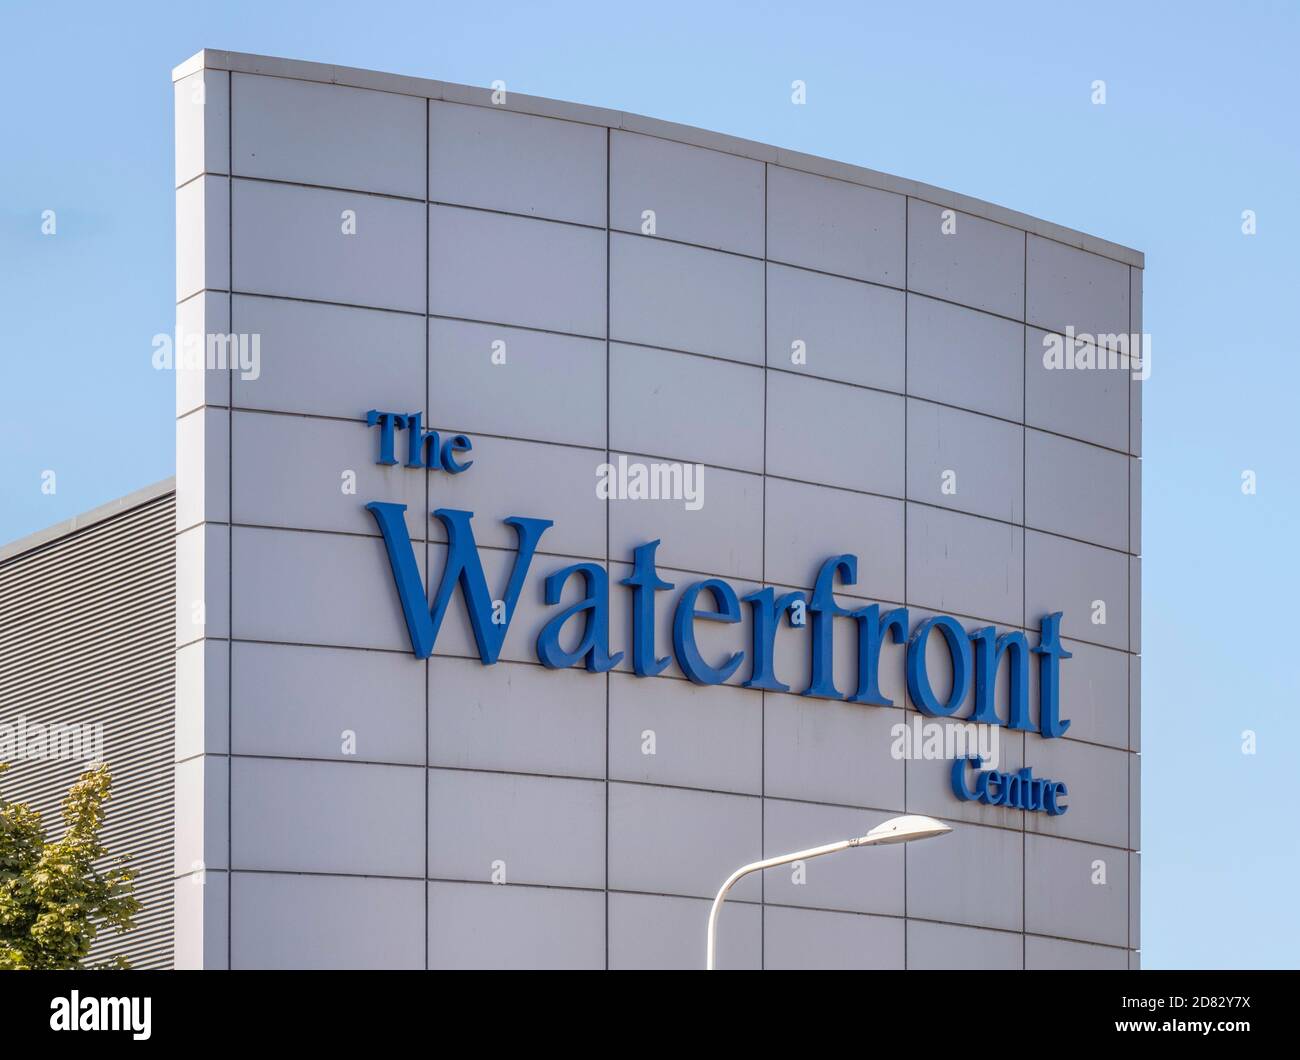 Sport Naar boven Woestijn The Waterfront Centre, St Helier, Jersey, Channel Islands, UK - Family  Entertainment Centre Stock Photo - Alamy